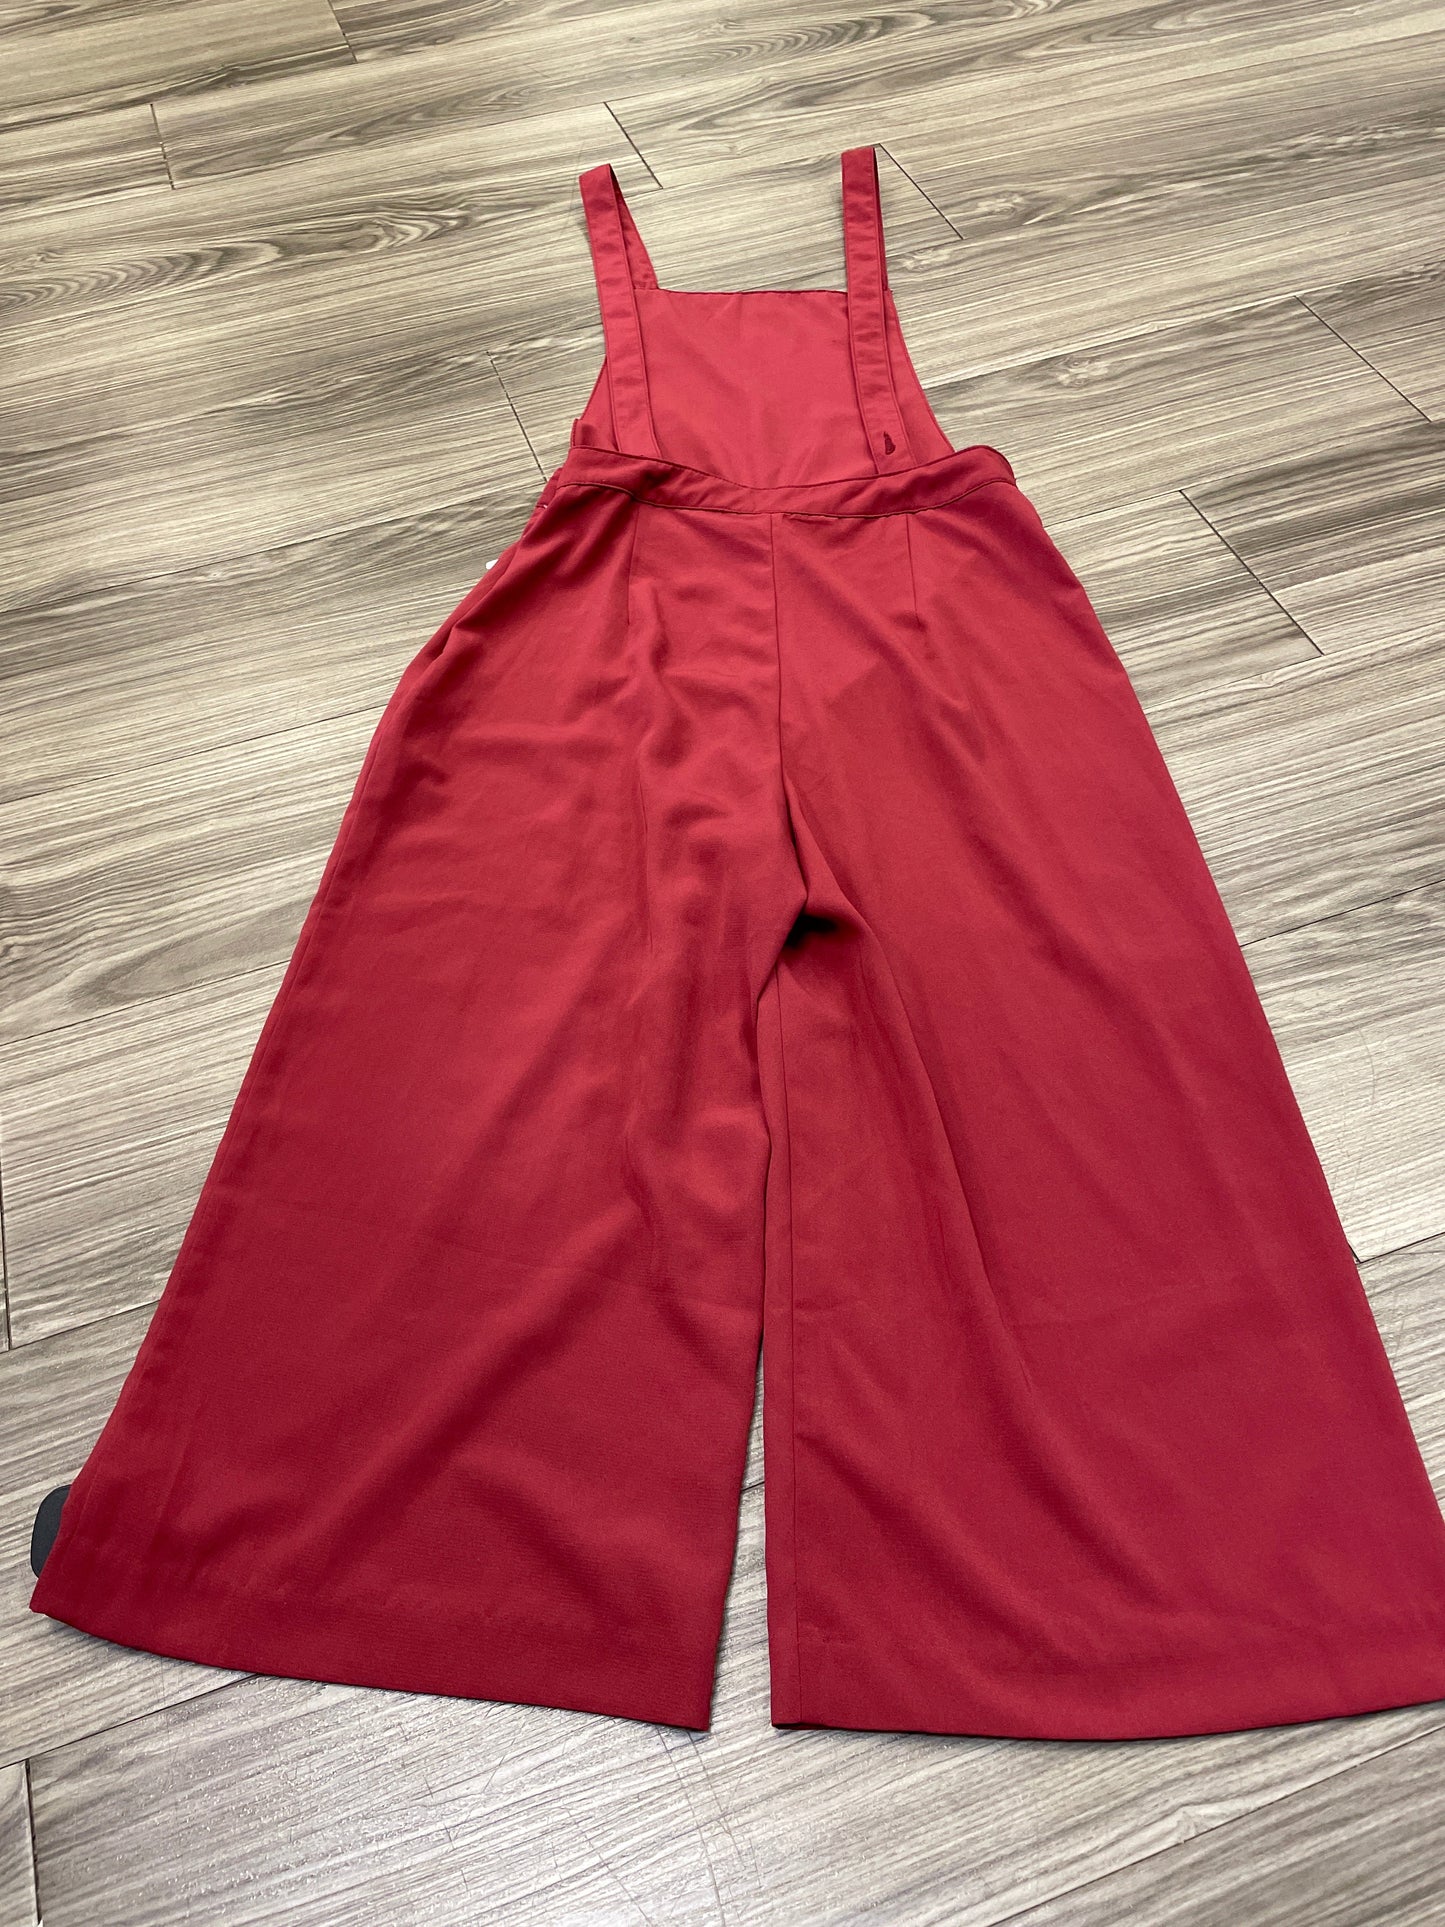 Overalls By Divided  Size: M